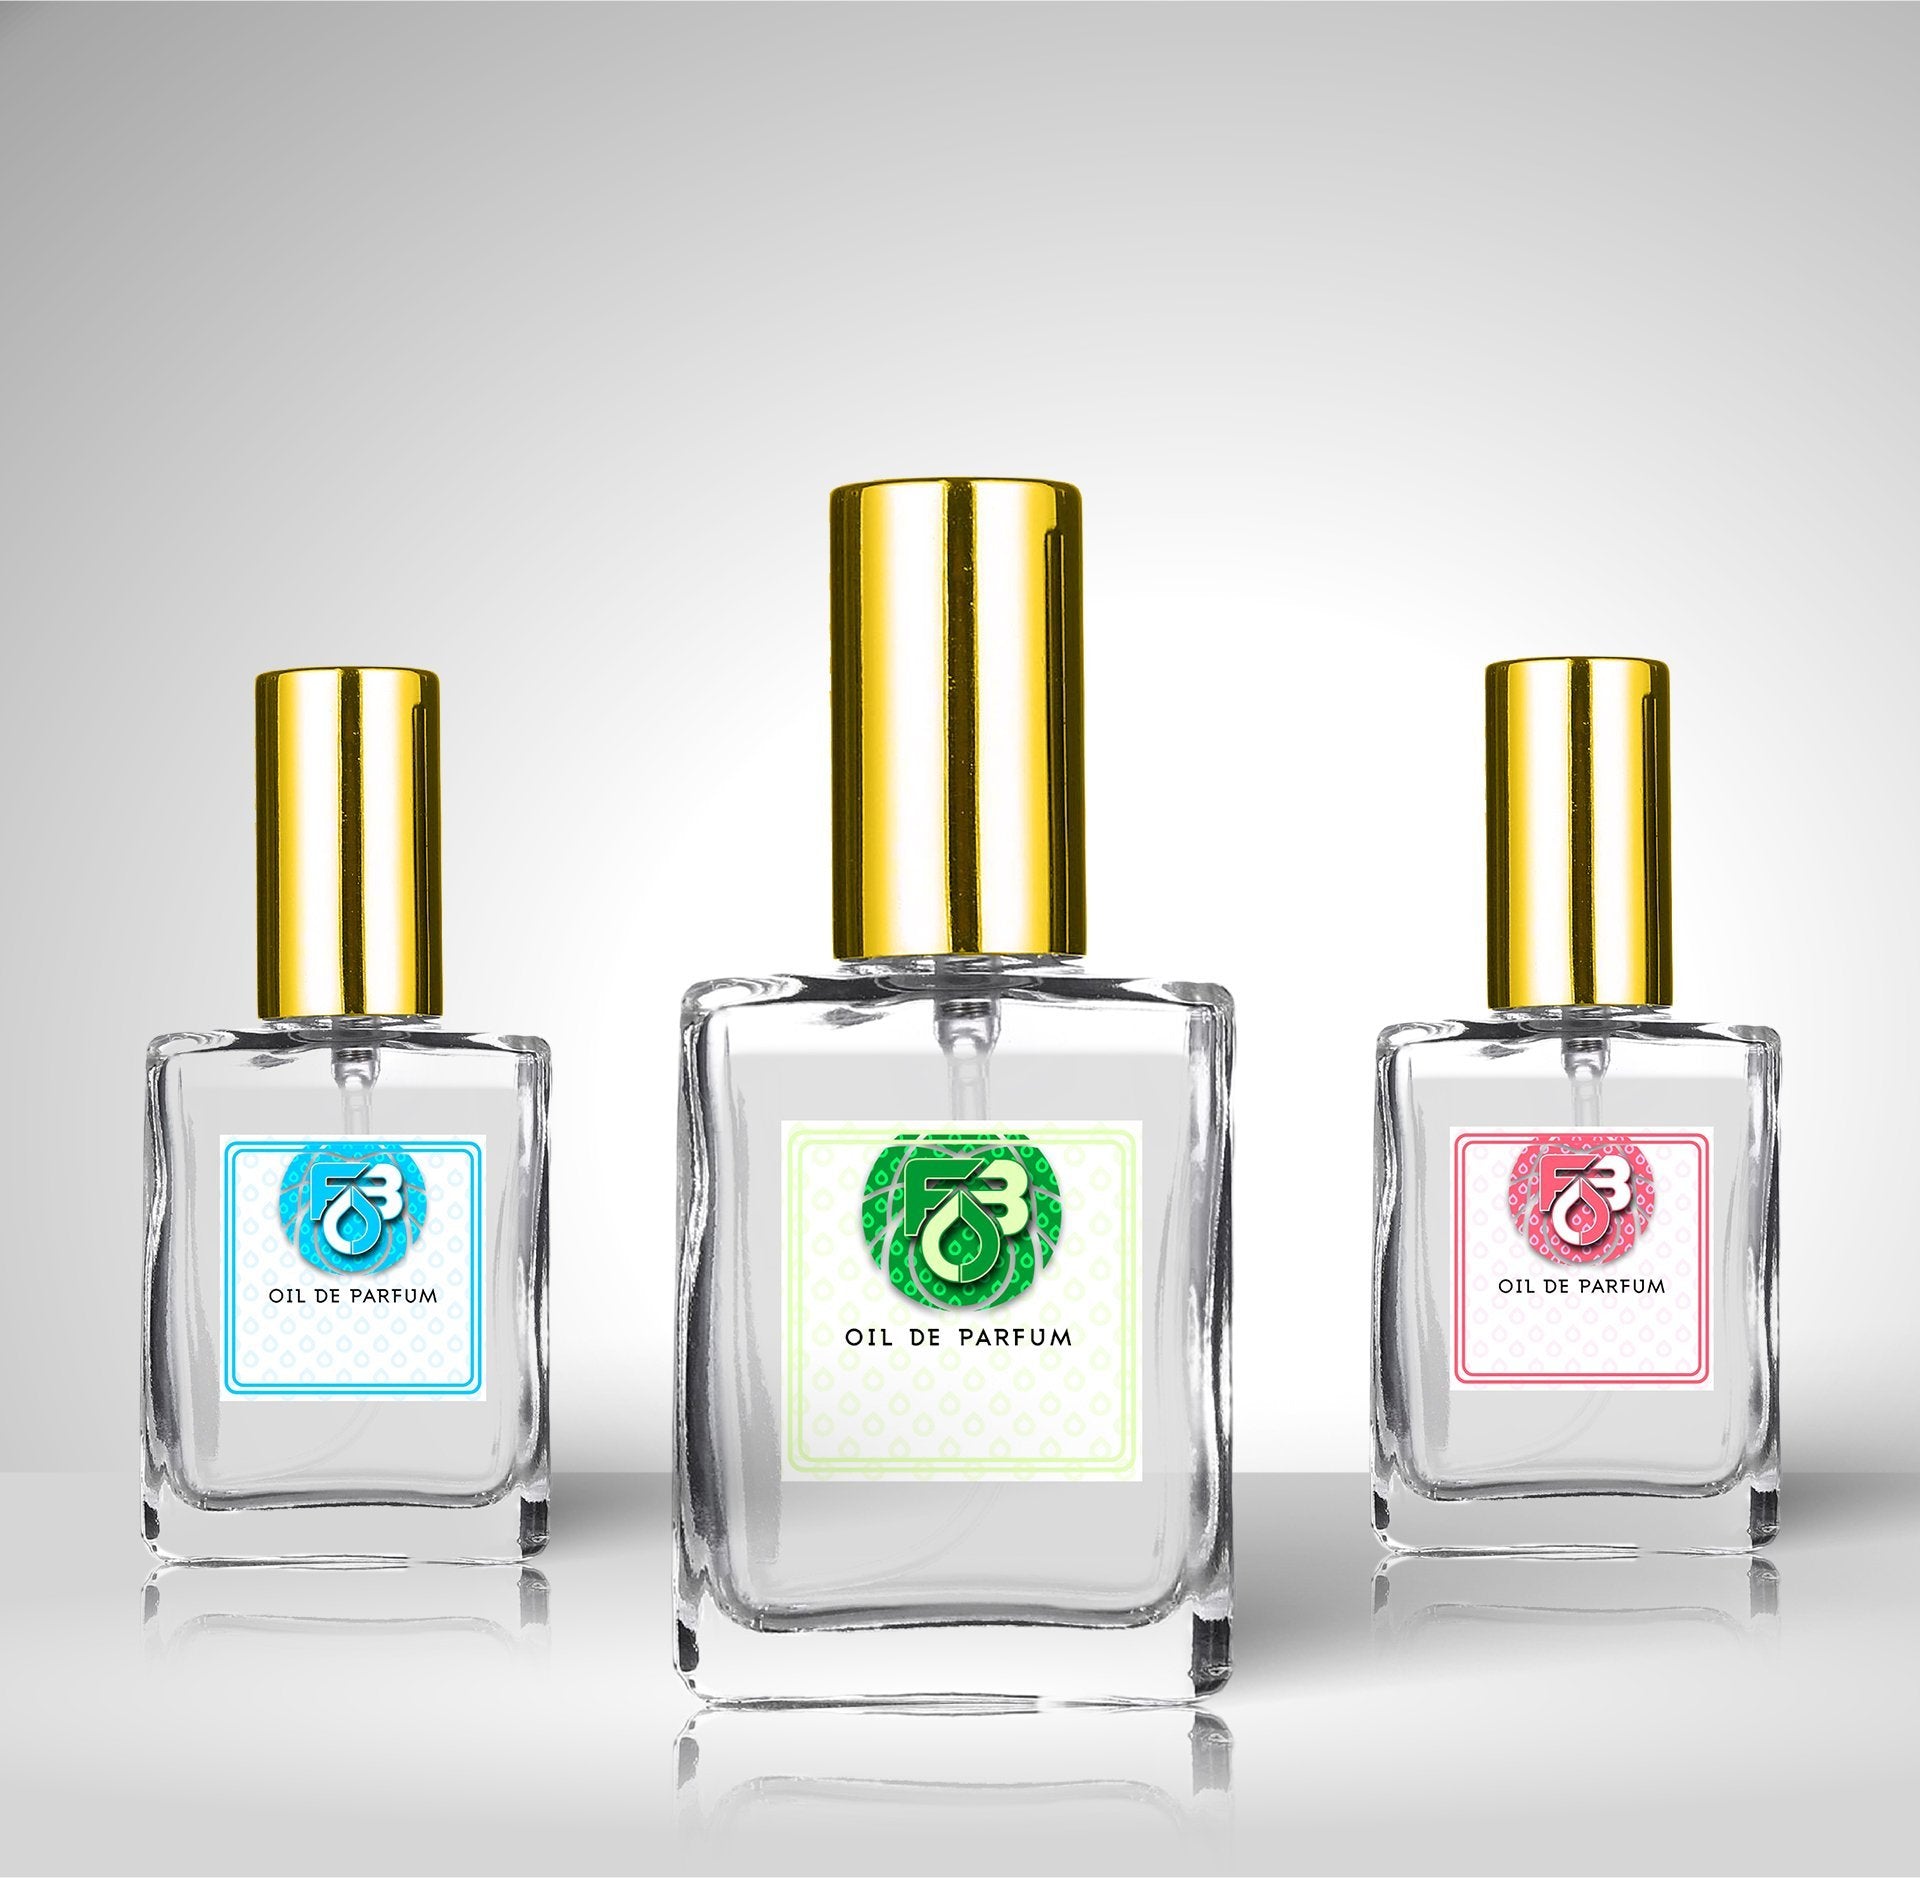 Compare Aroma To Chance Eau Tendre